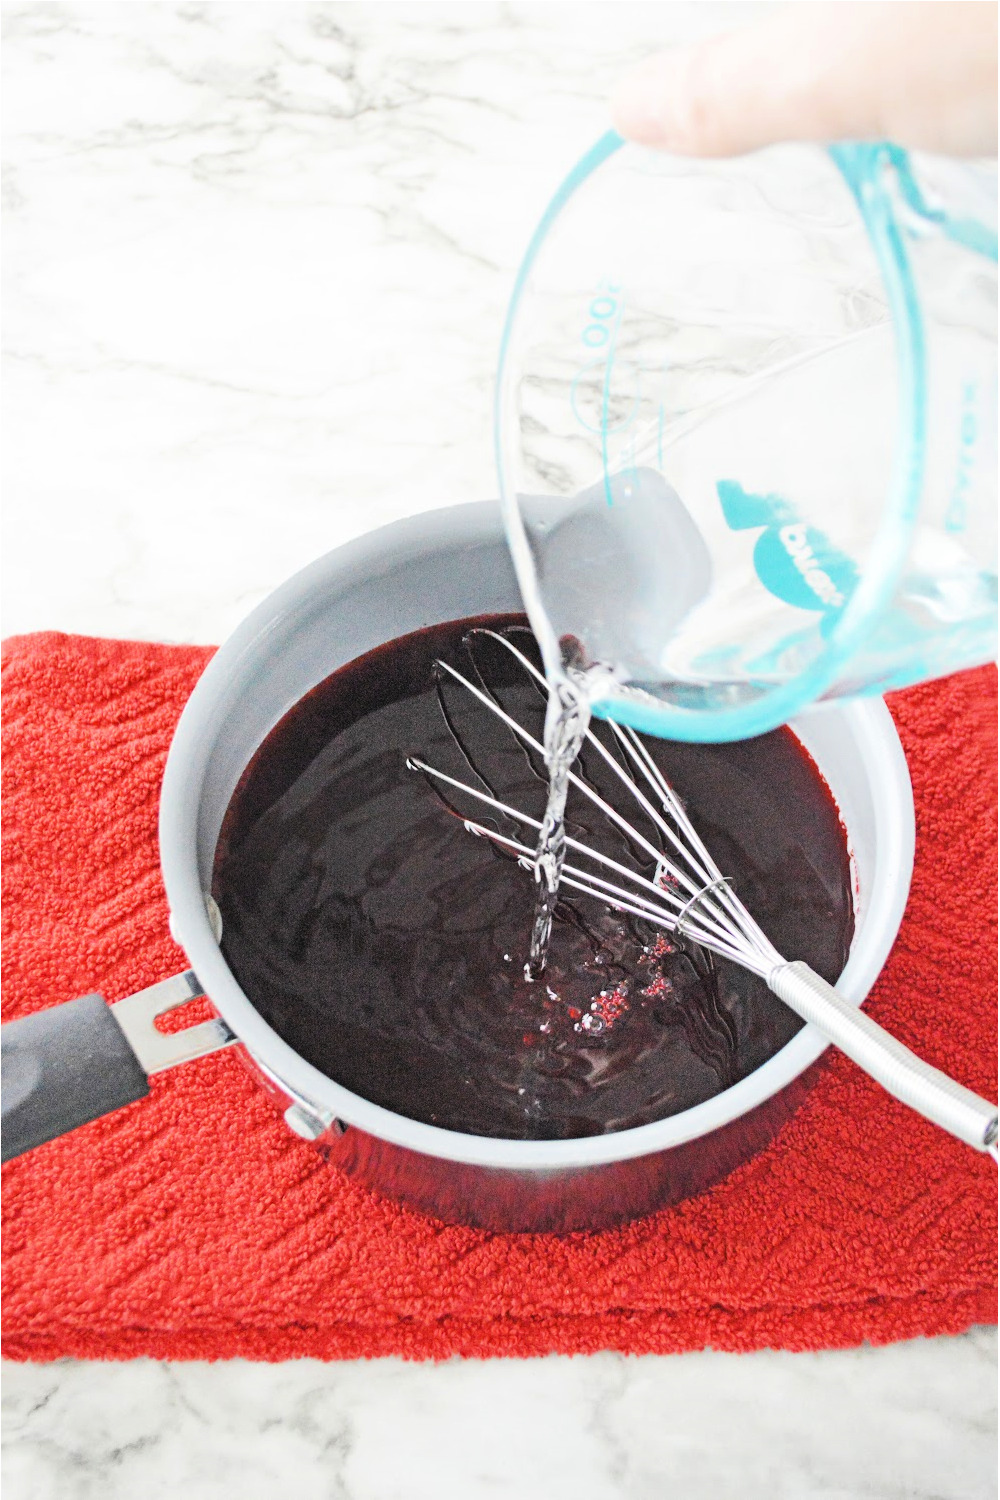 Whisk in vodka into the cranberry Jell-O to make cranberry jello shots.